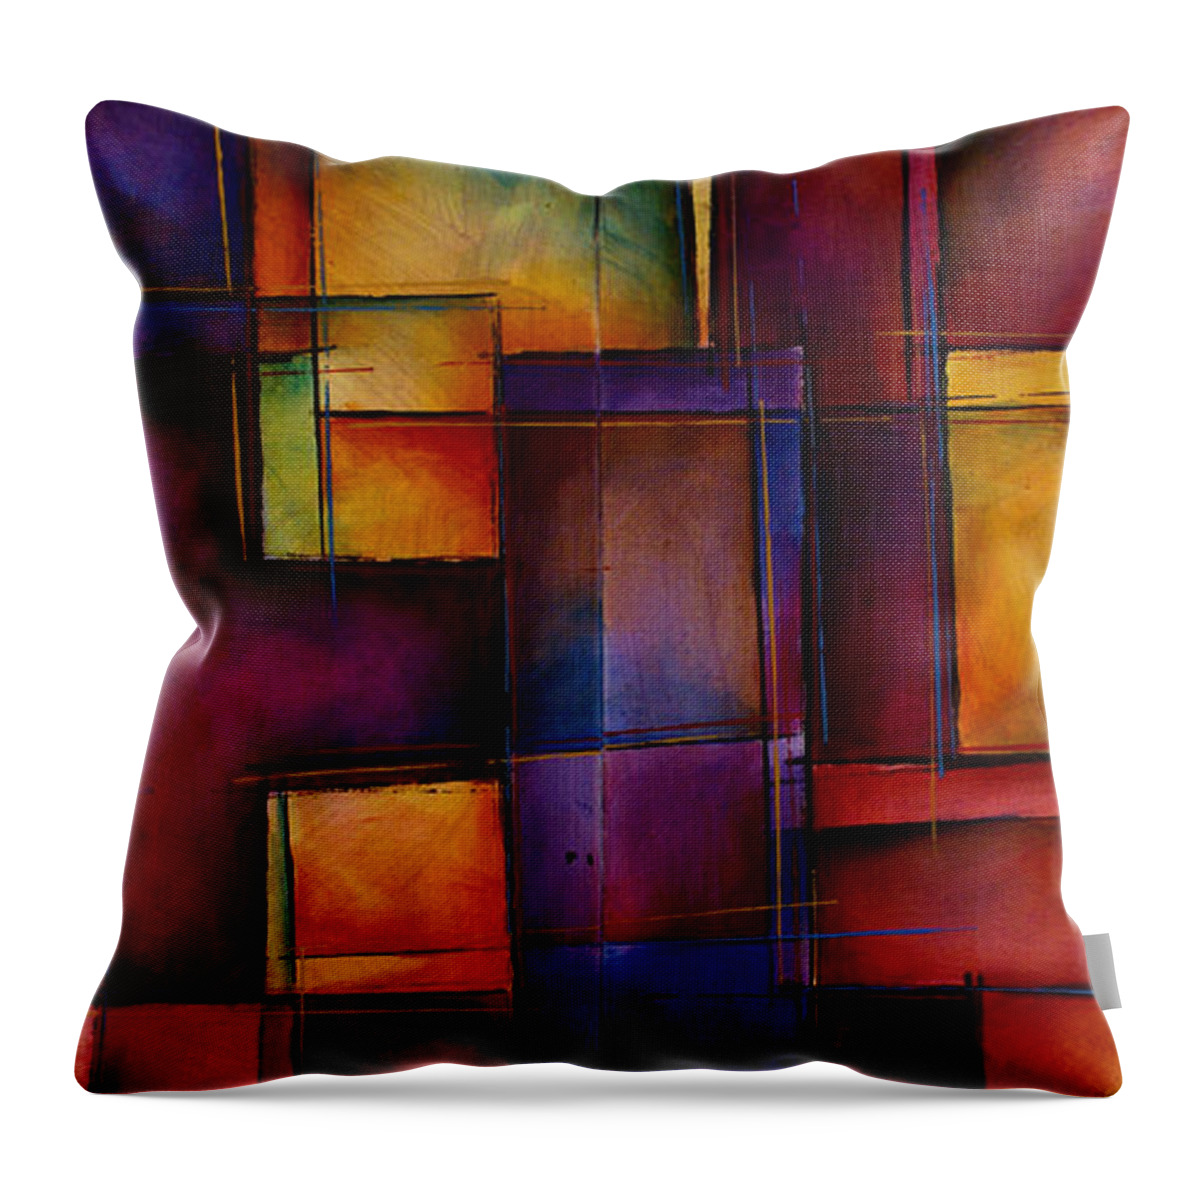 Abstract Design Throw Pillow featuring the painting Abstract Design 93 by Michael Lang